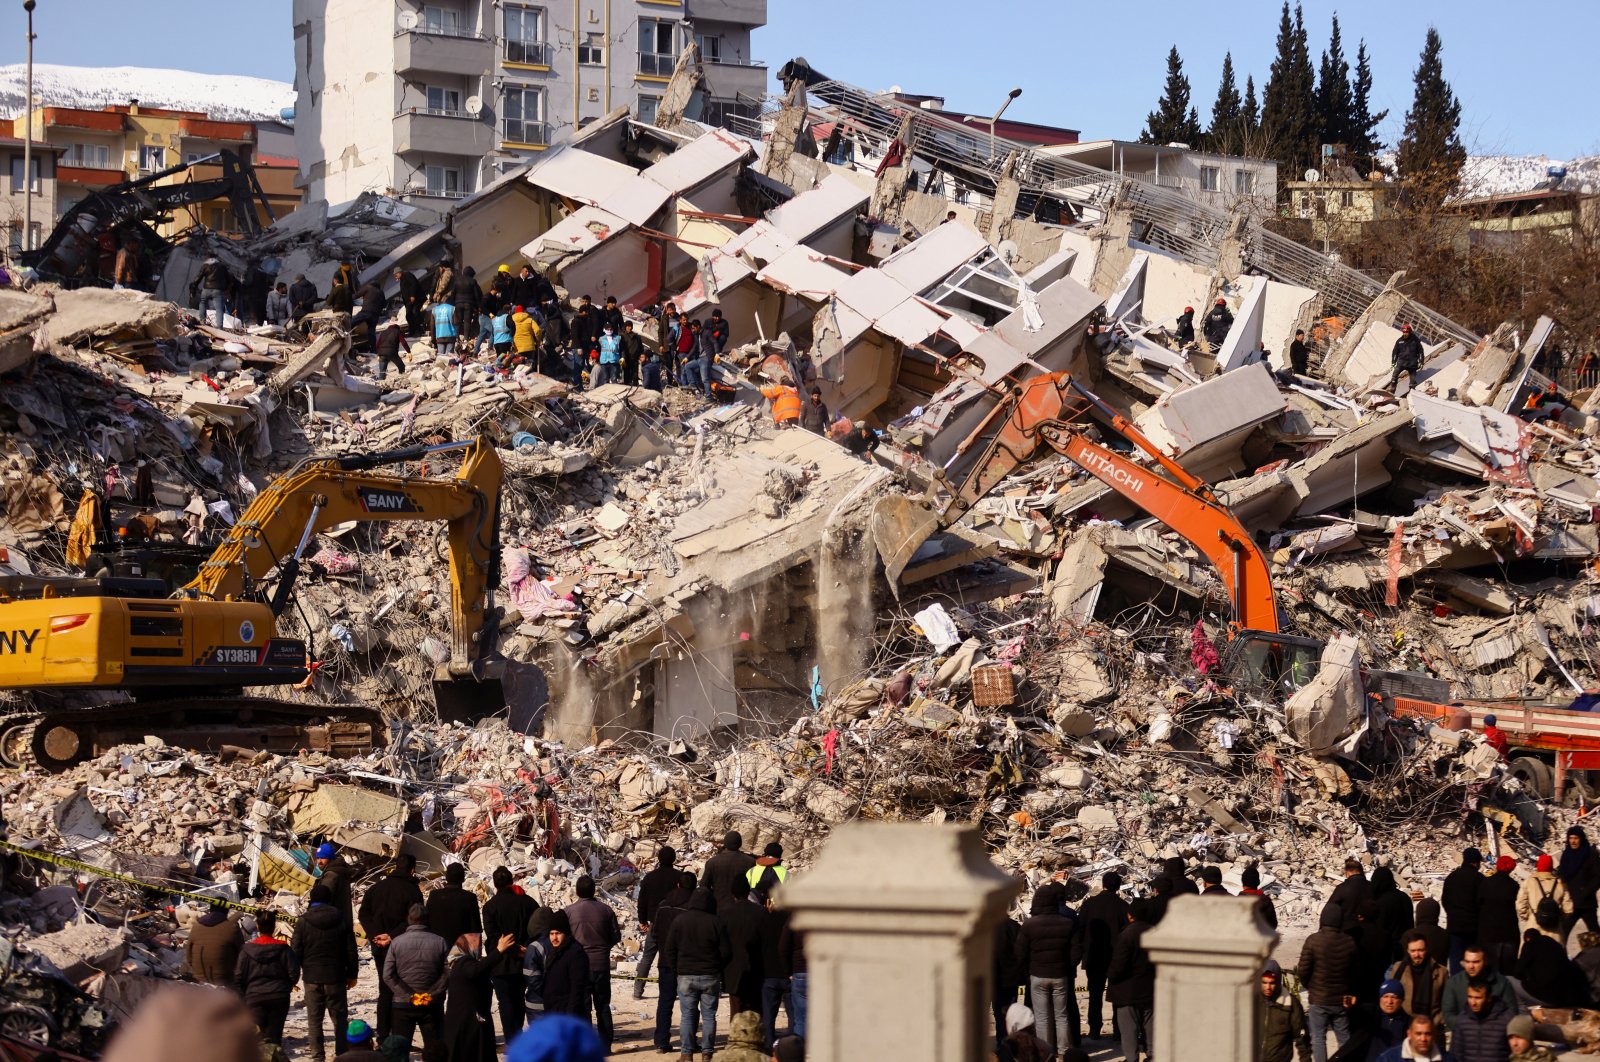 Rescue operations continue at the site of a collapsed building, in the aftermath of an earthquake, in Kahramanmaraş, Türkiye, Feb. 9, 2023. (Reuters Photo)